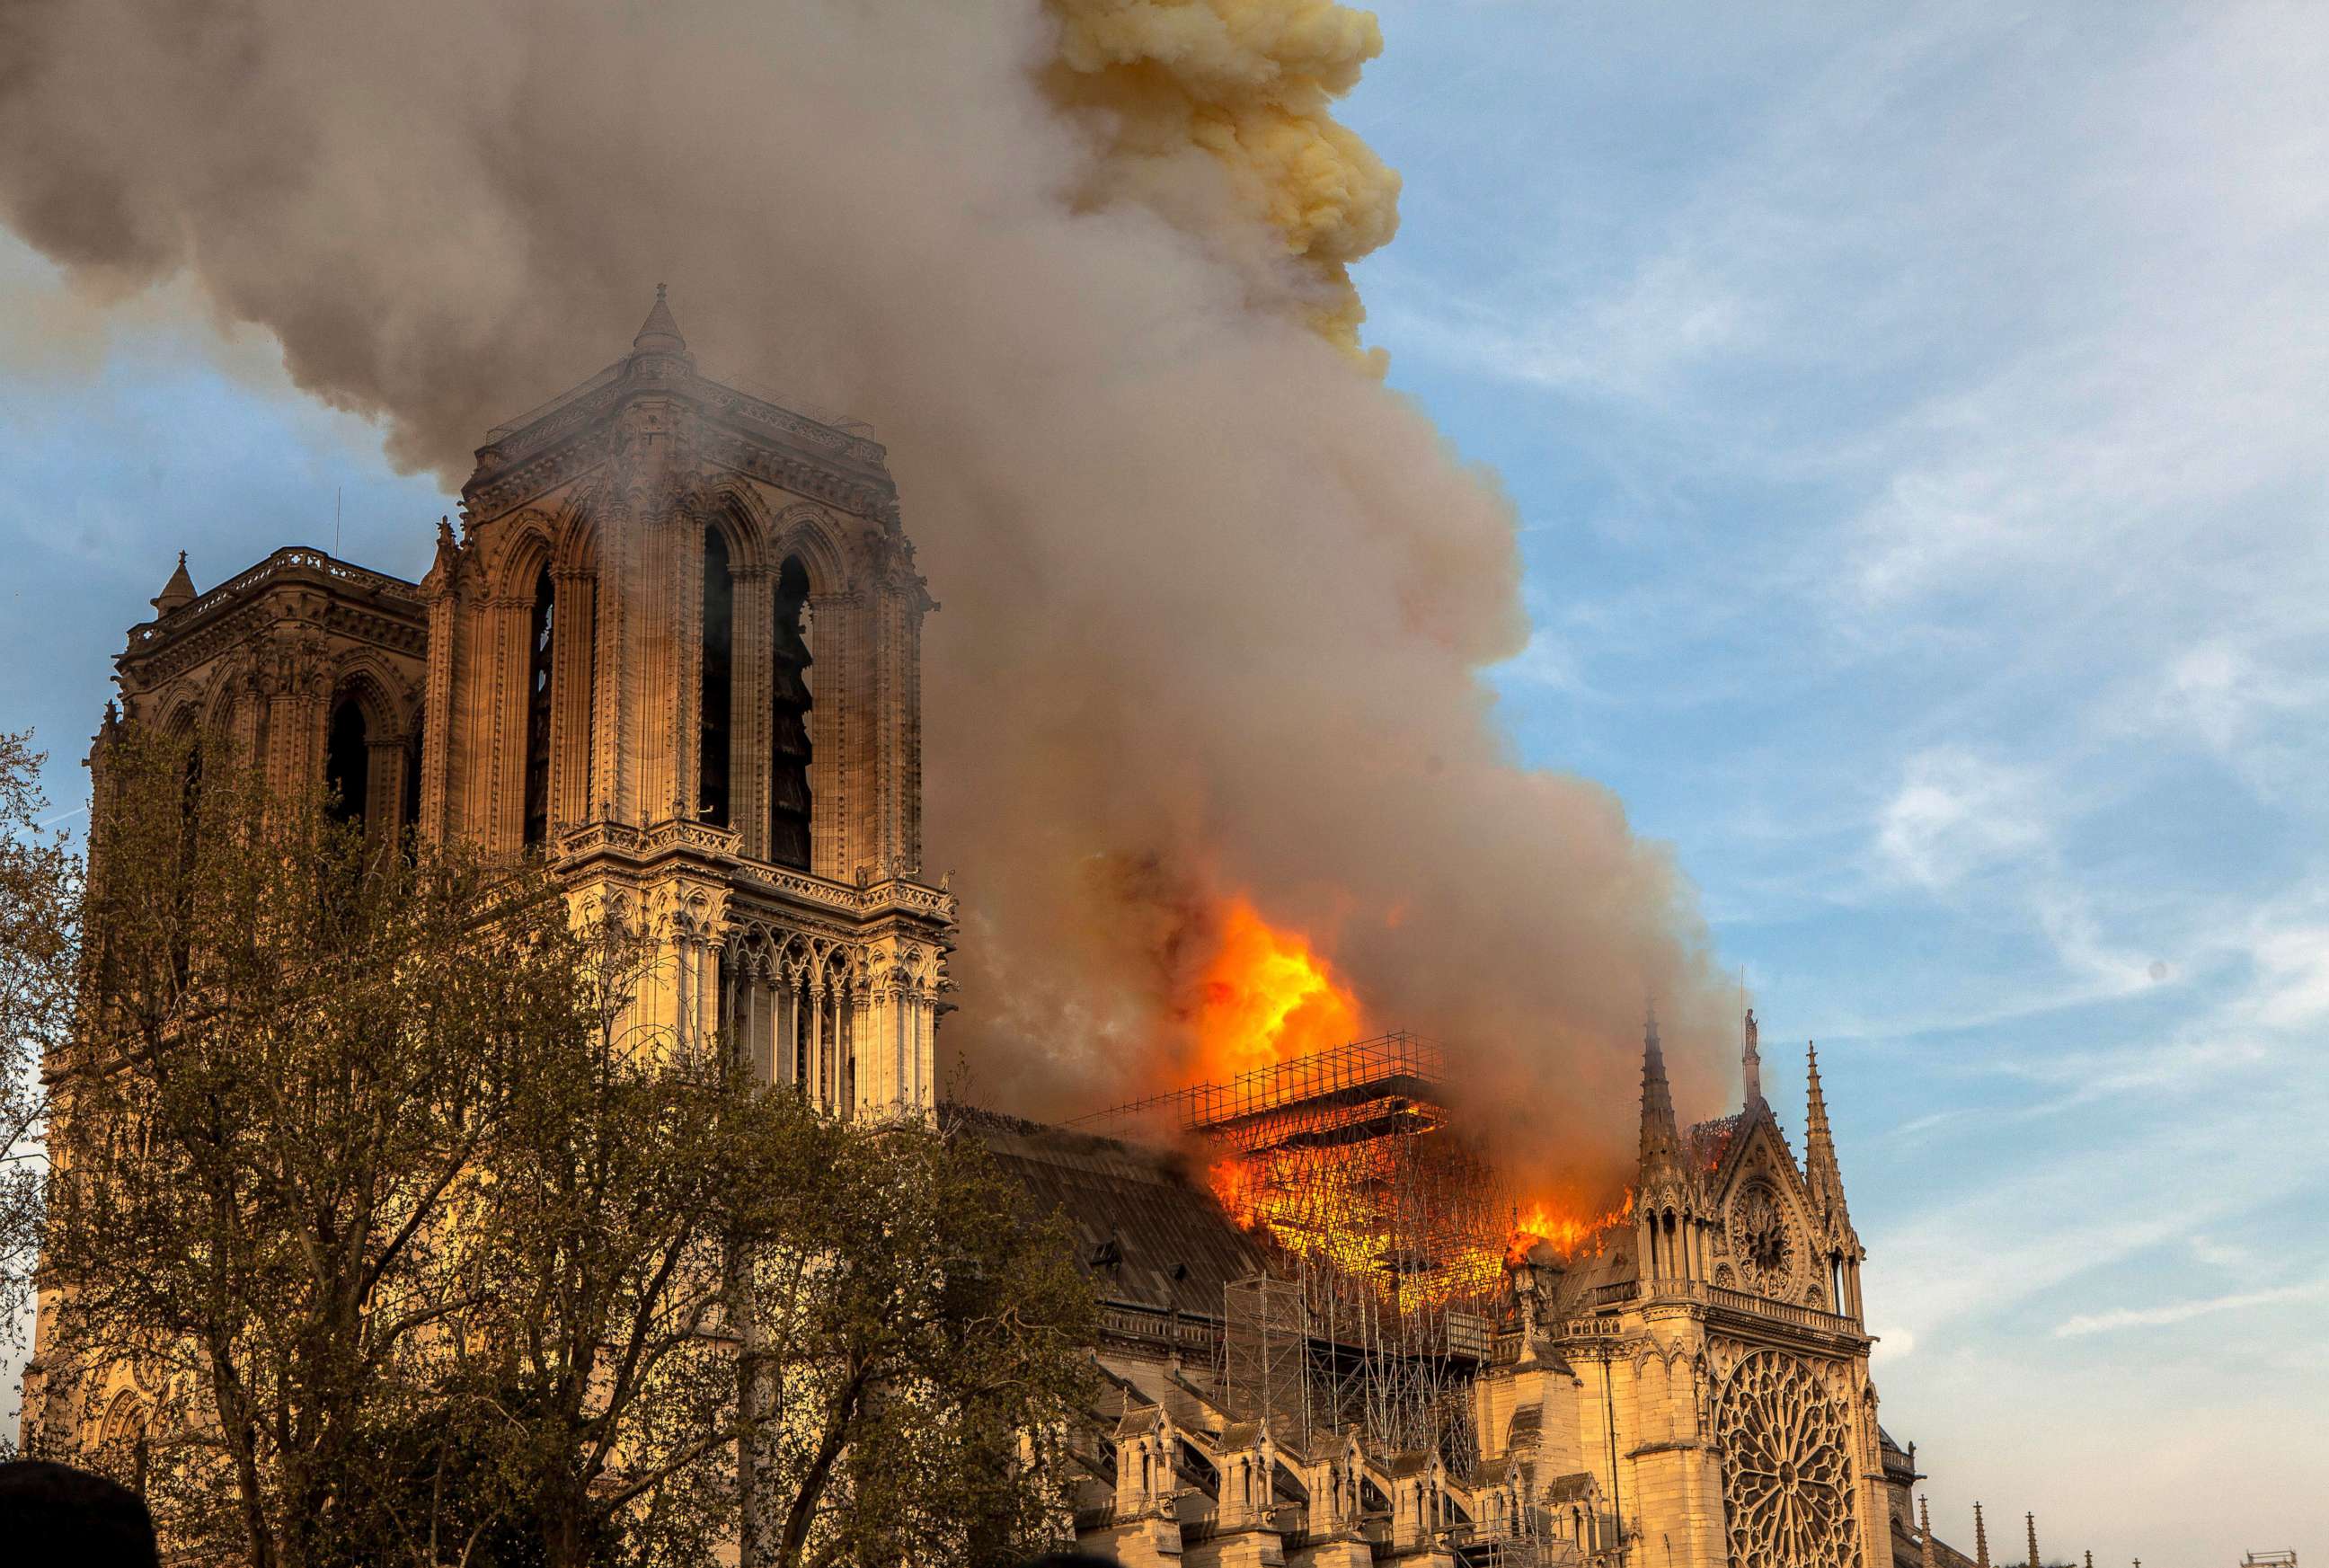 PHOTO: FILE - In this April 15, 2019, file photo, the Notre Dame Cathedral burns in Paris. The cathedral stands crippled, locked in a dangerous web of twisted metal scaffolding one year after a cataclysmic fire.